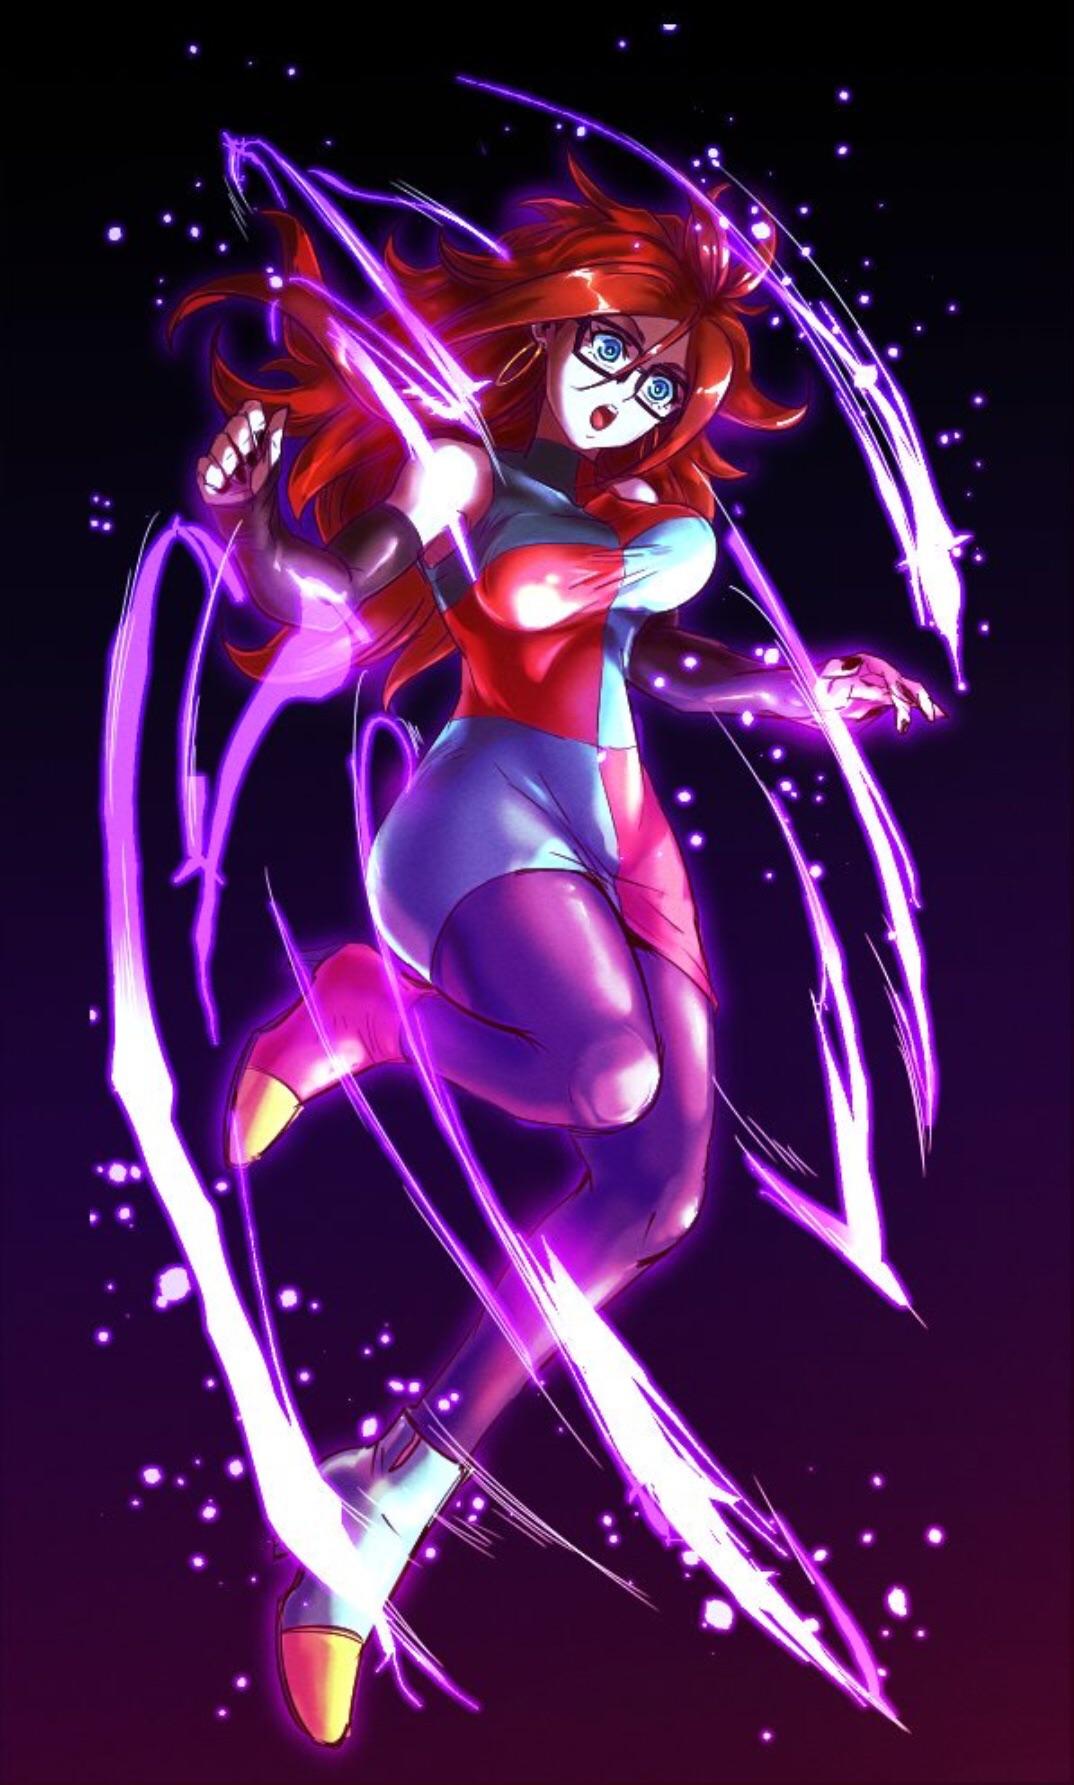 Android 21 Wallpaper